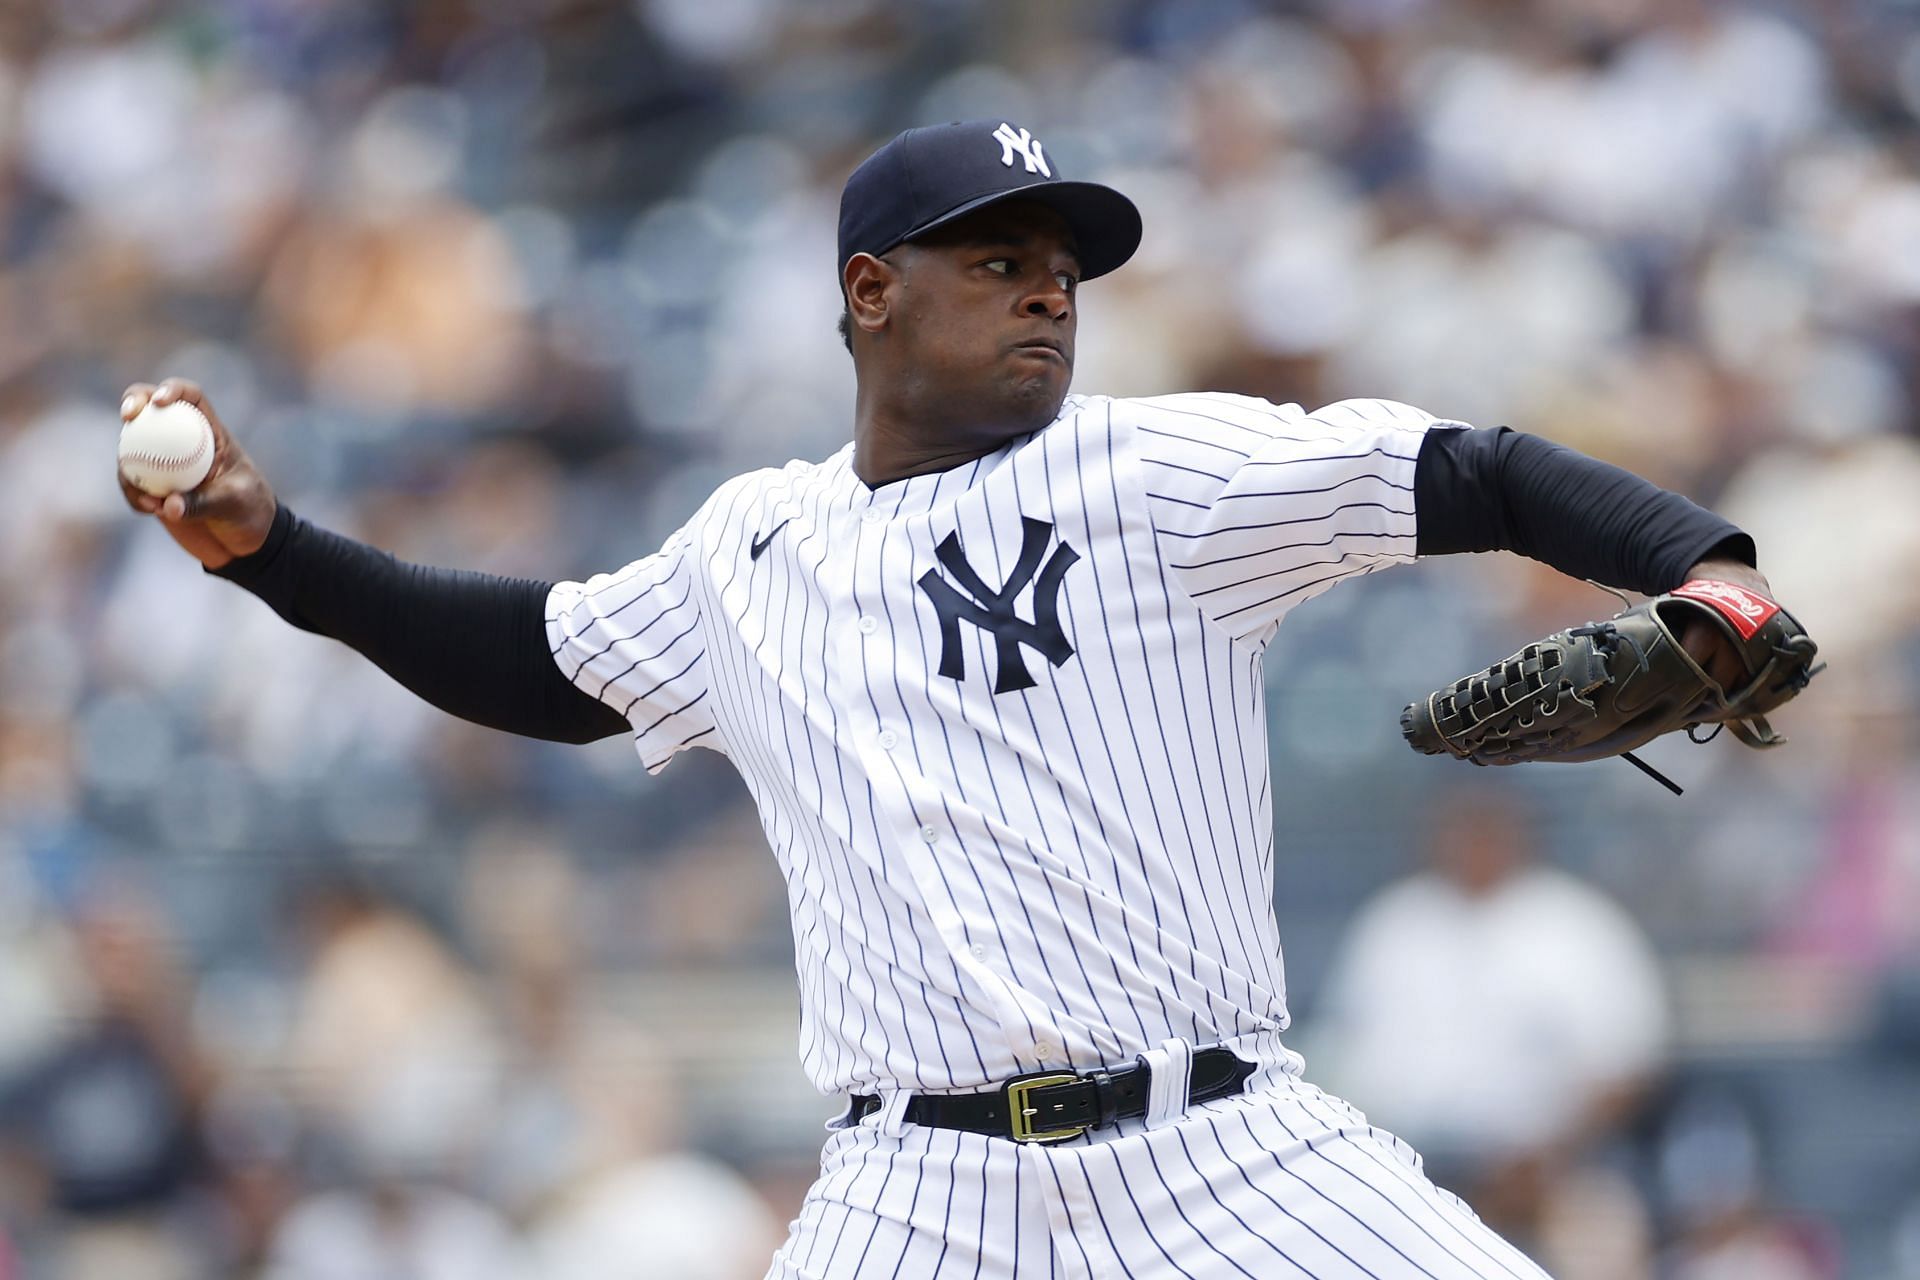 New York Yankees starting pitcher Luis Severino struck out 10 Detroit Tigers batters today